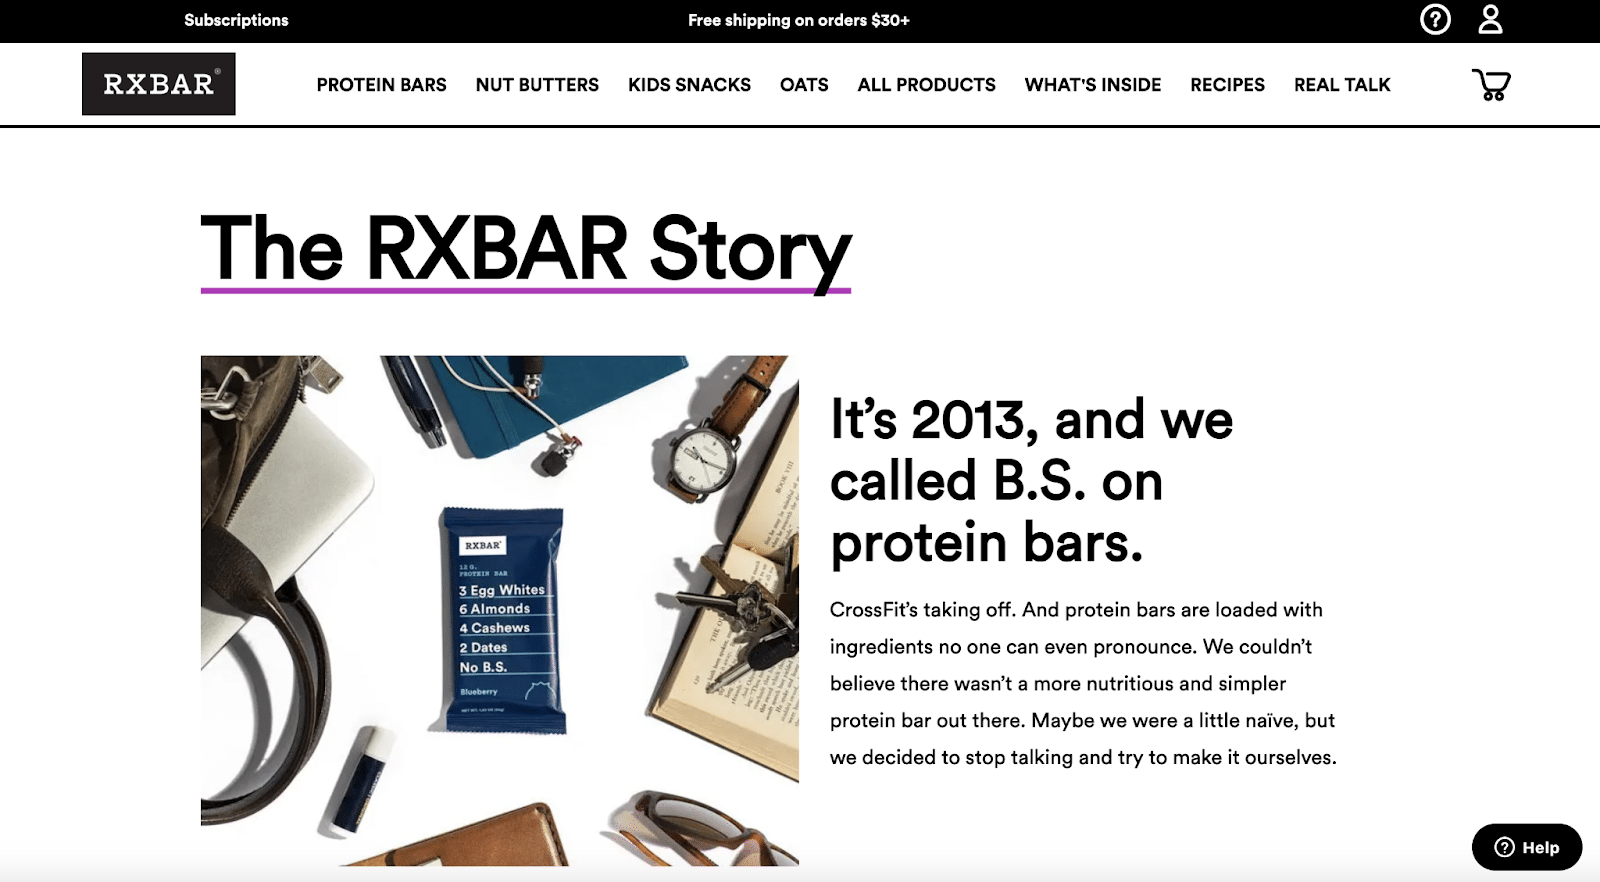 RXBAR shares the company story on its About Us page.